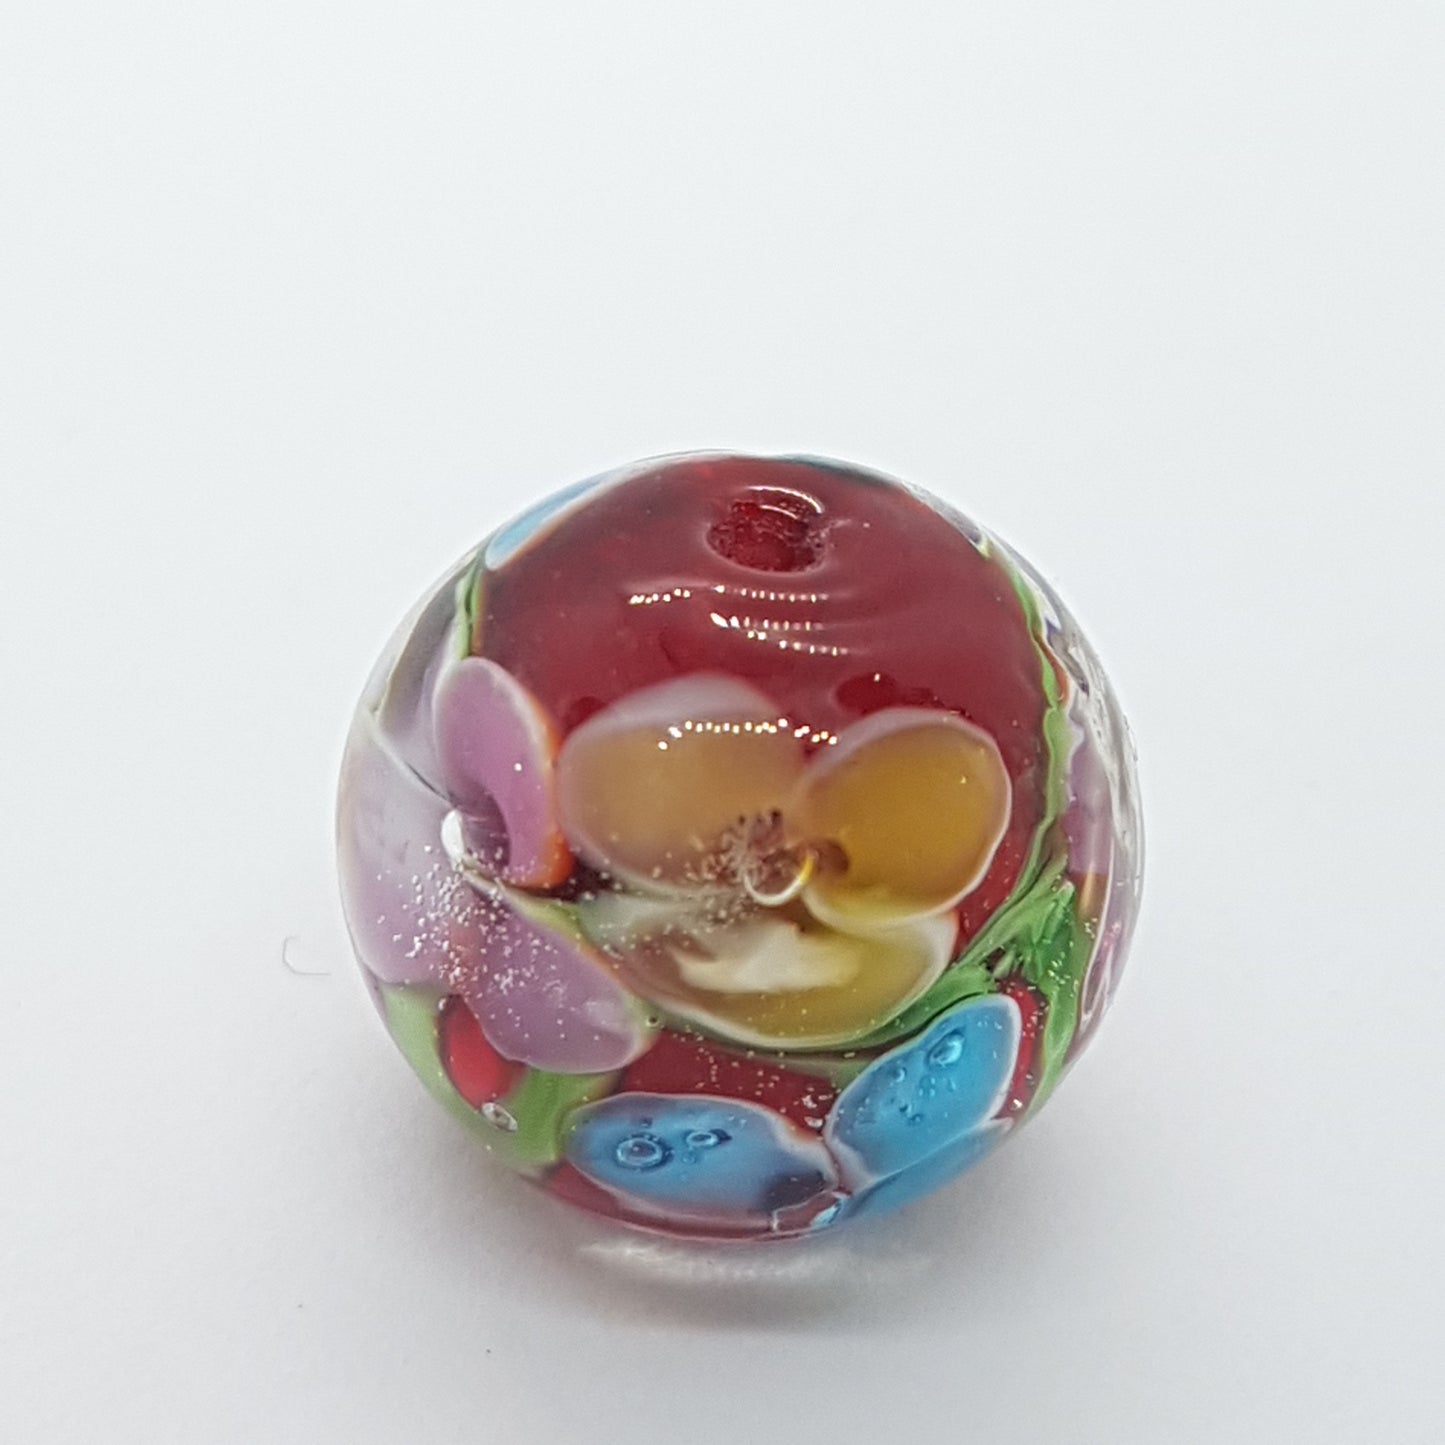 15mm Red Floral Lampwork Glass Bead